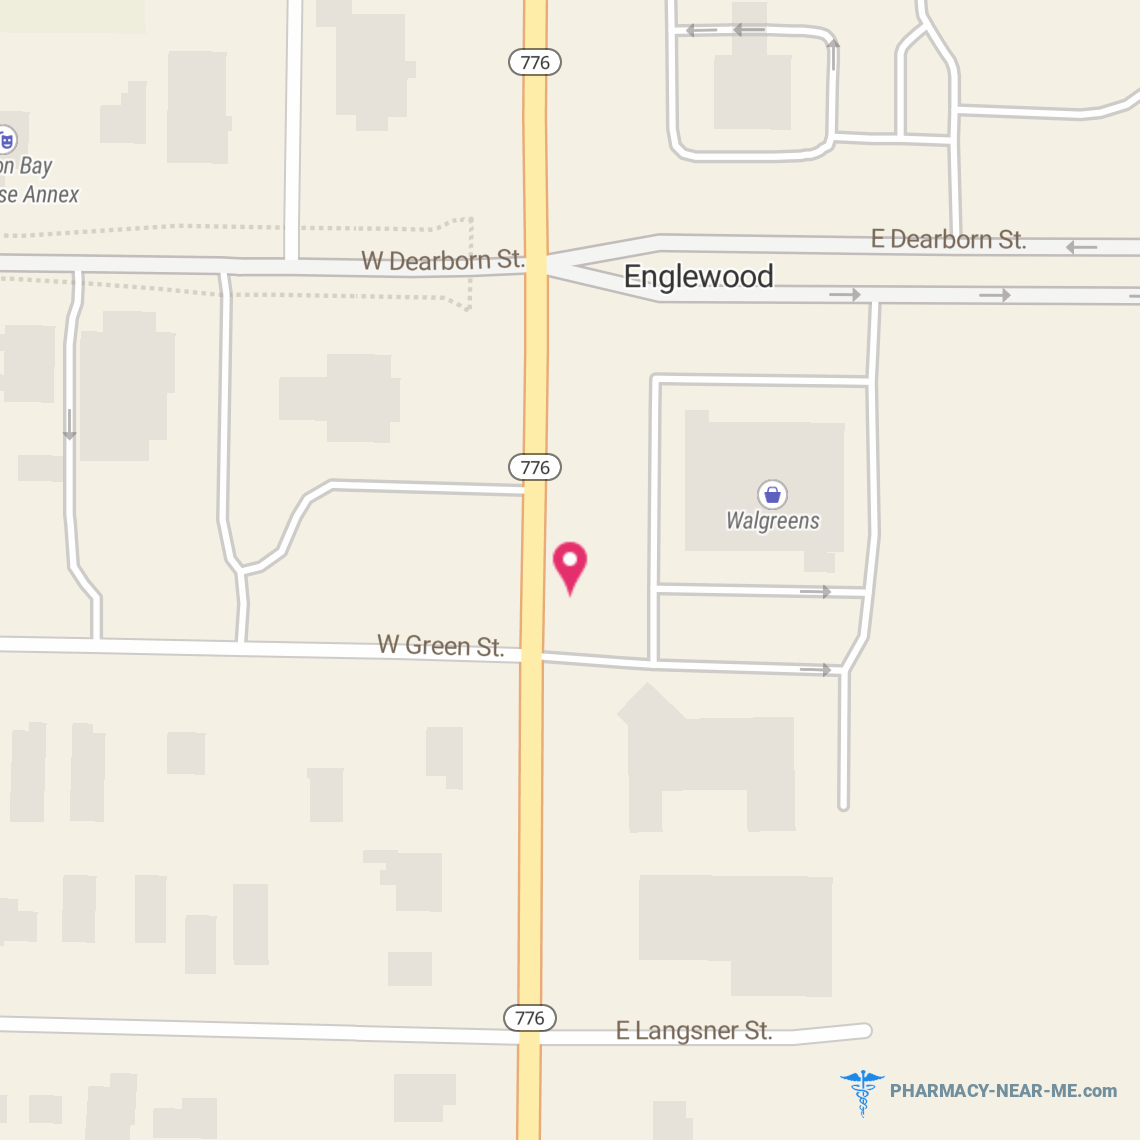 WALGREENS #05859 - Pharmacy Hours, Phone, Reviews & Information: 15 South Indiana Avenue, Englewood, Florida 34223, United States